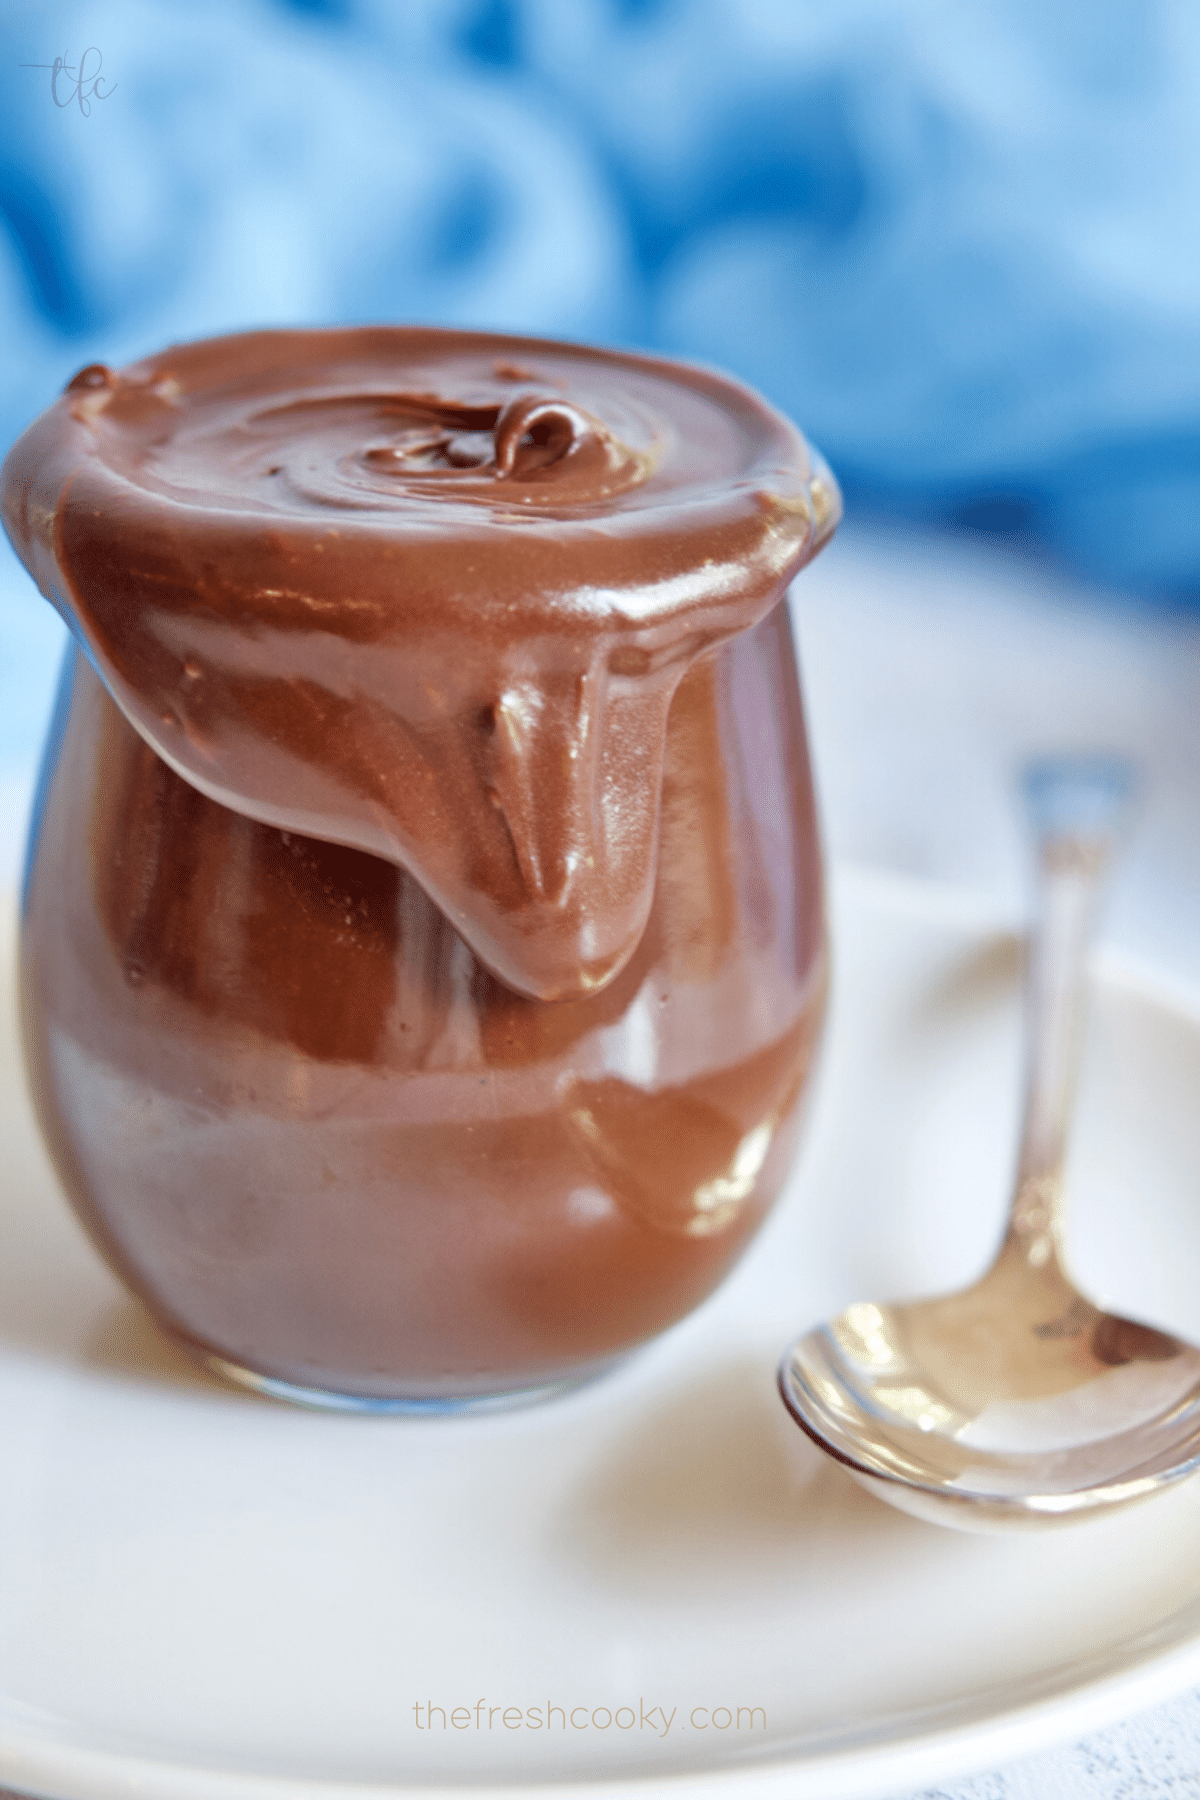 Pin for old fashioned hot fudge sauce with chocolate sauce oozing over the side, silver spoon on plate.